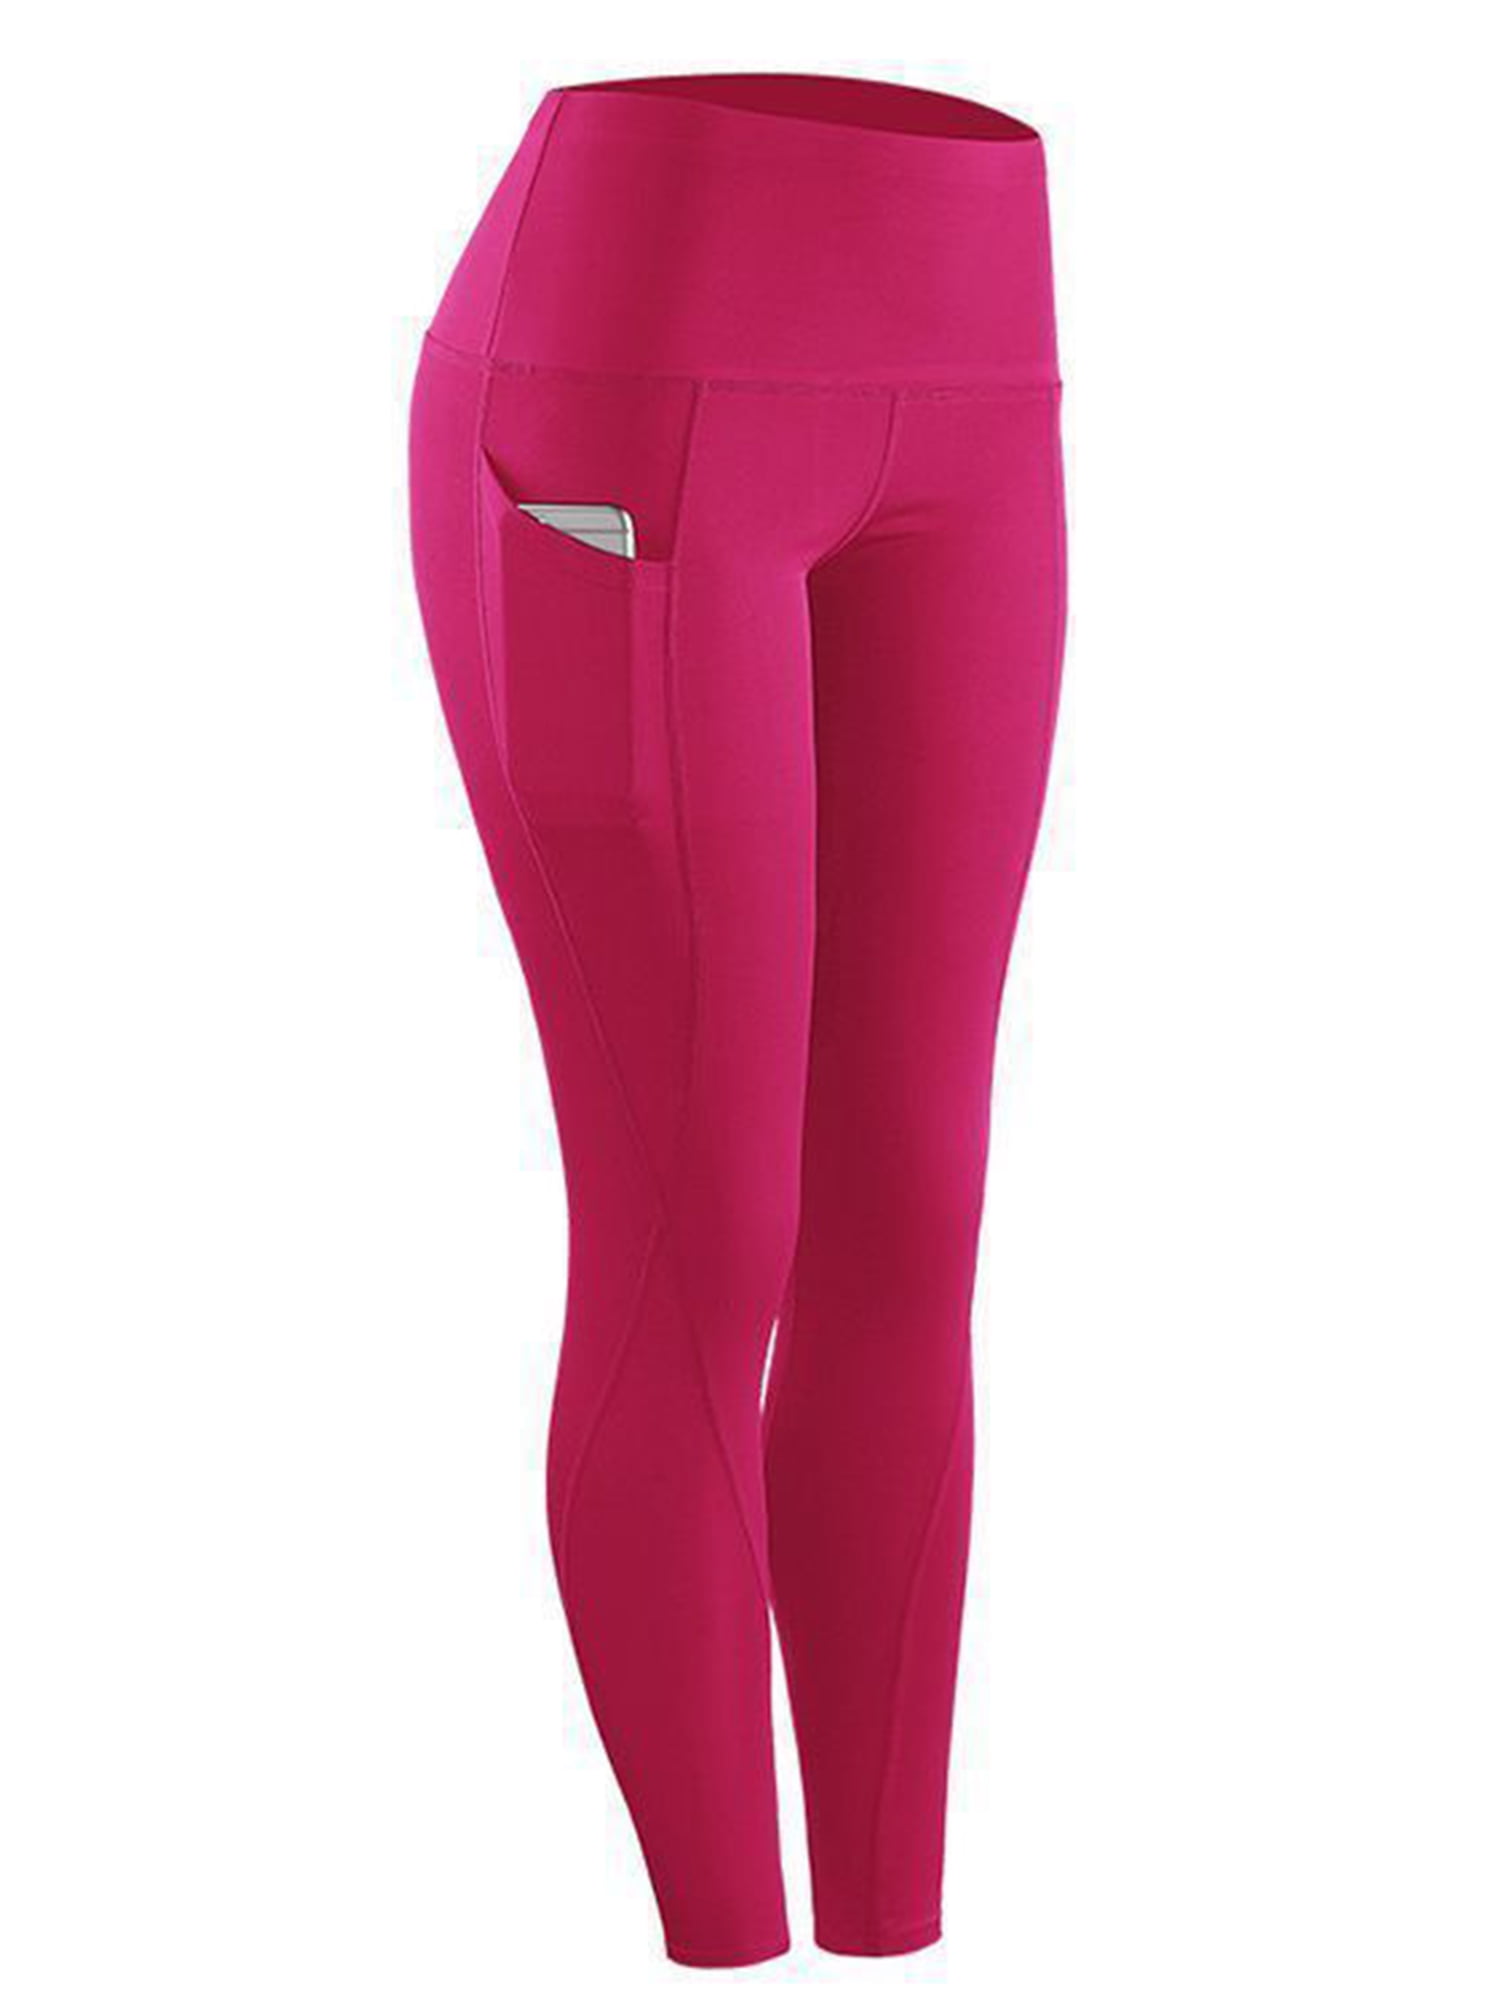 Women Stretch Pants Plus Size Workout Clothes Yoga Pants with Pockets High  Waist Jogging Running Sports Gym Fitness Pants Sweatpants 